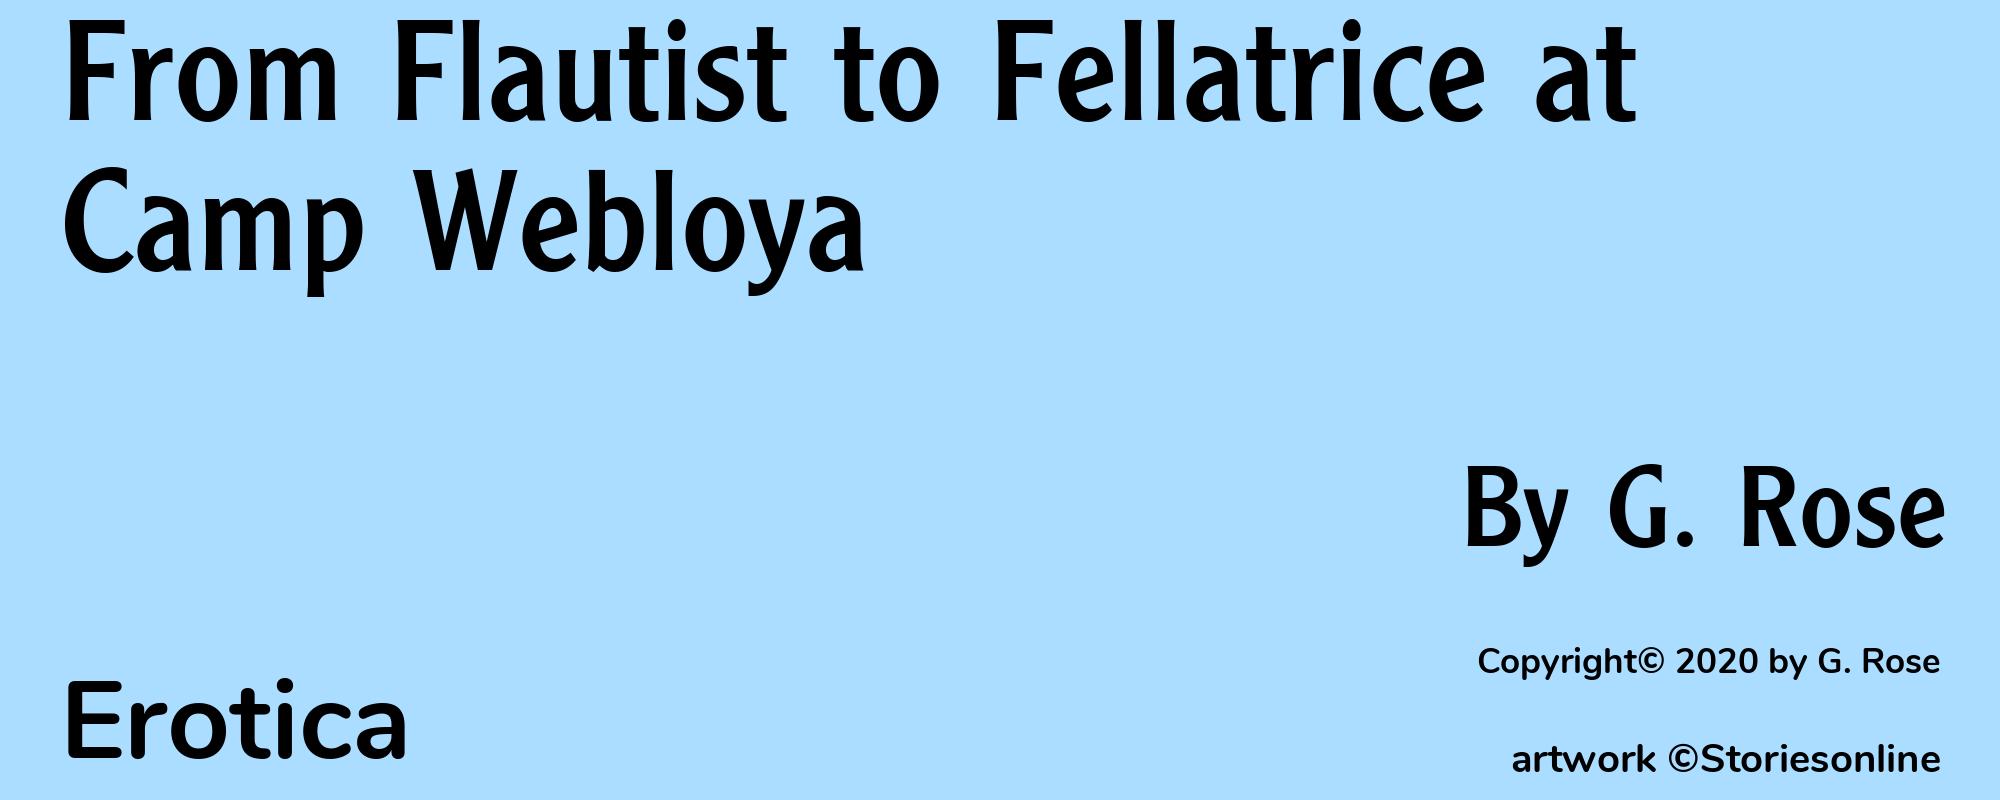 From Flautist to Fellatrice at Camp Webloya - Cover